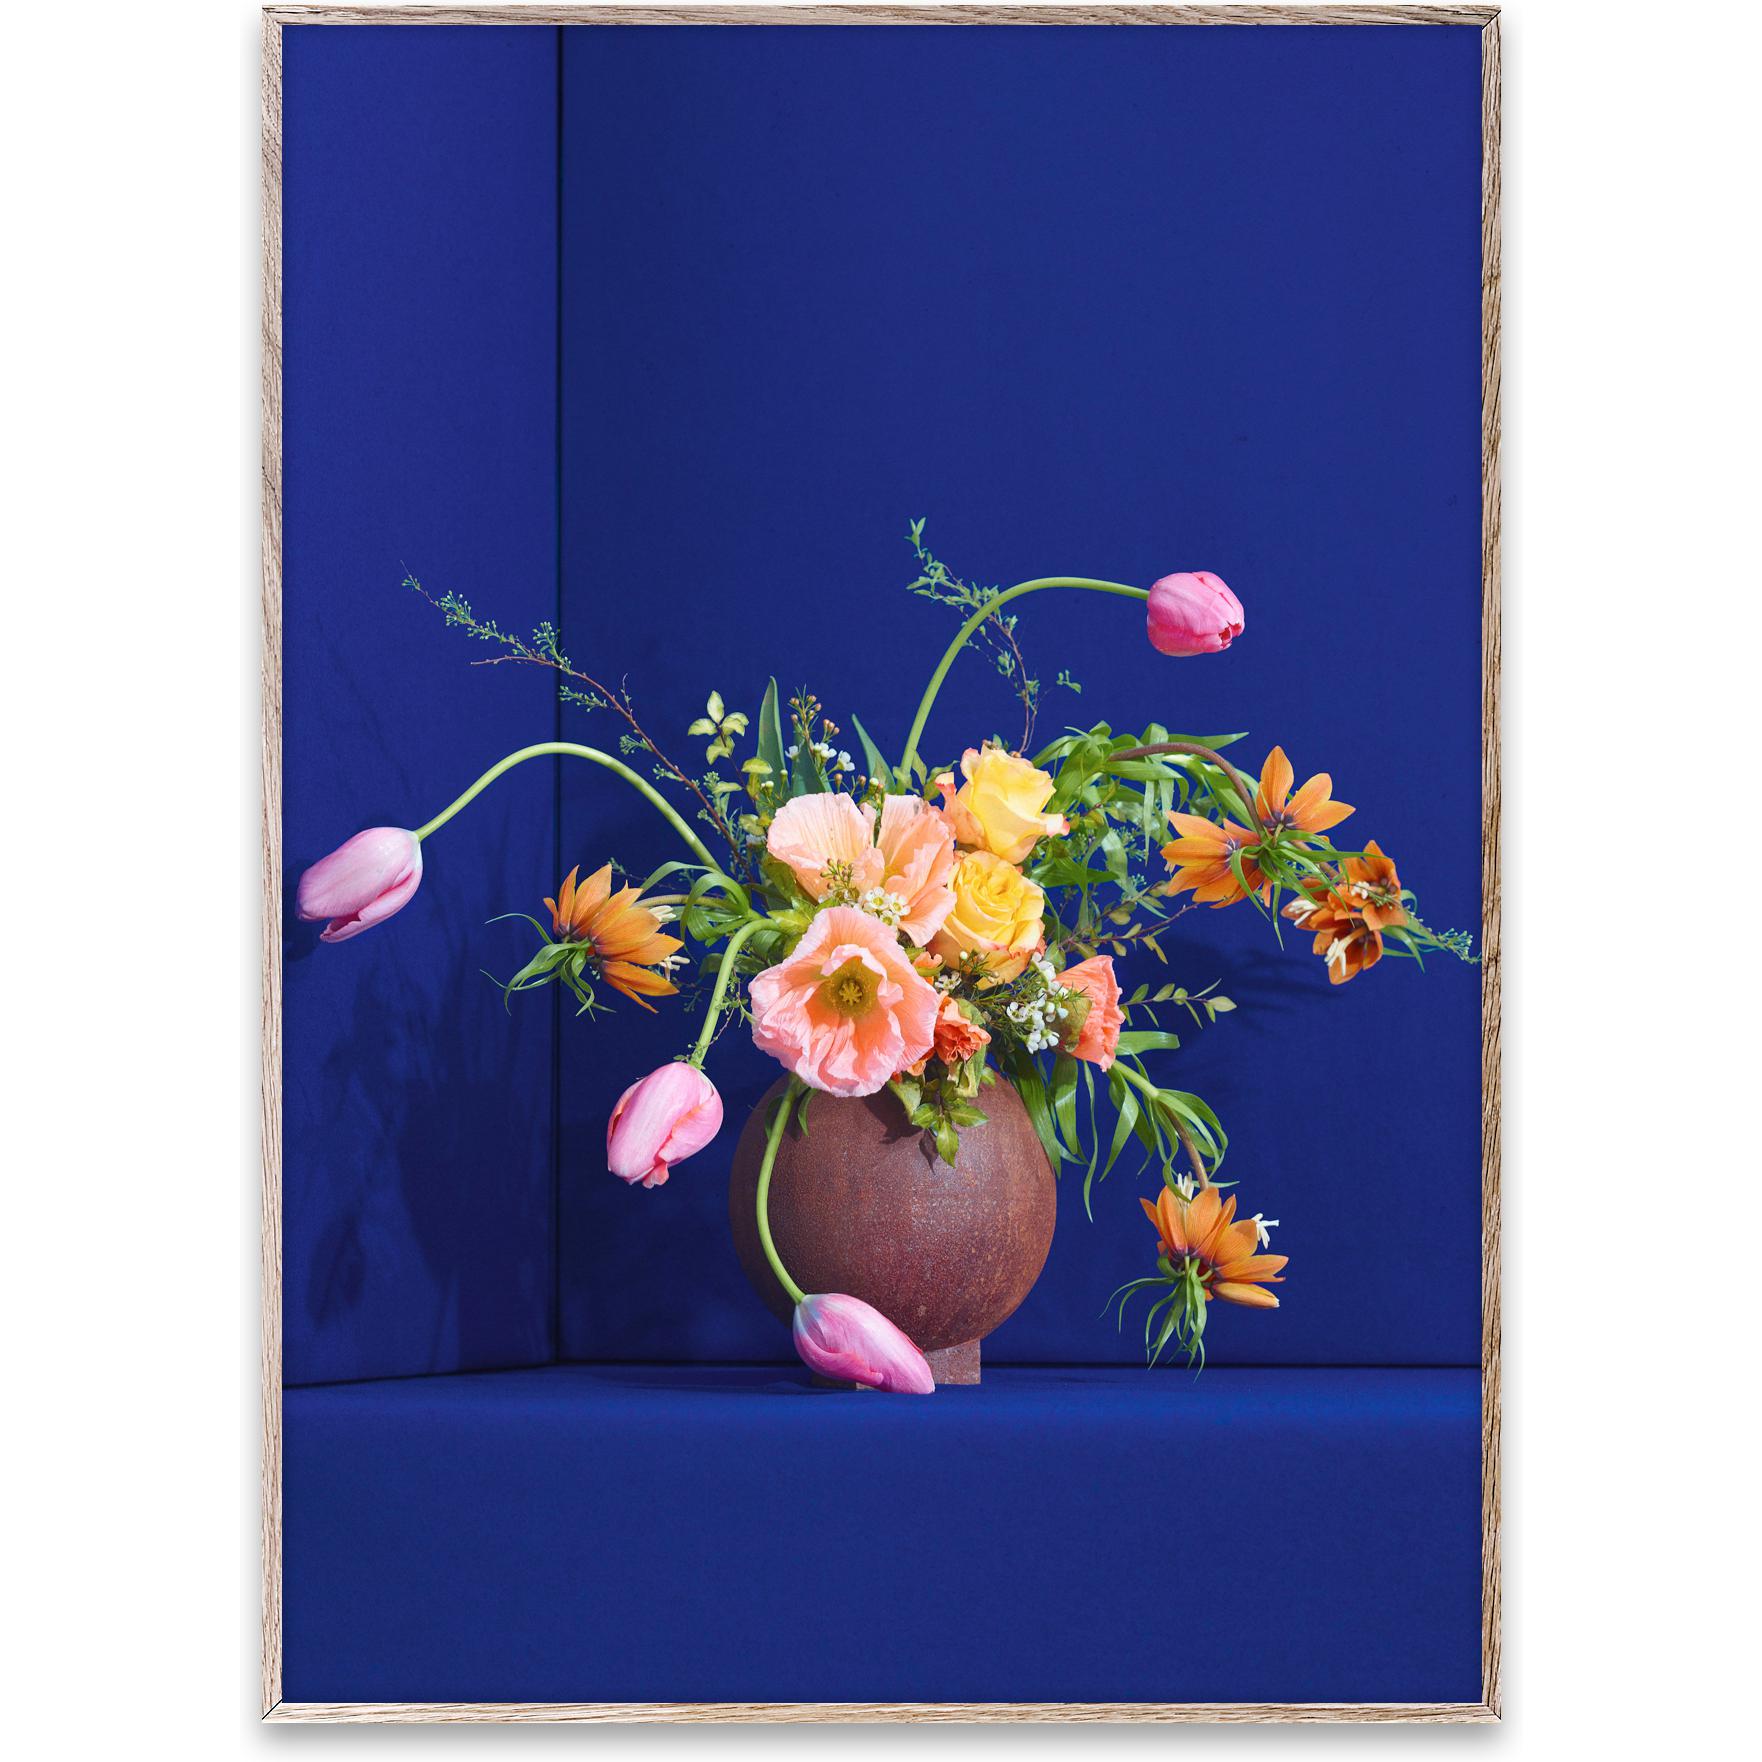 Paper Collective Blomst 01 Poster 50x70 cm, blauw